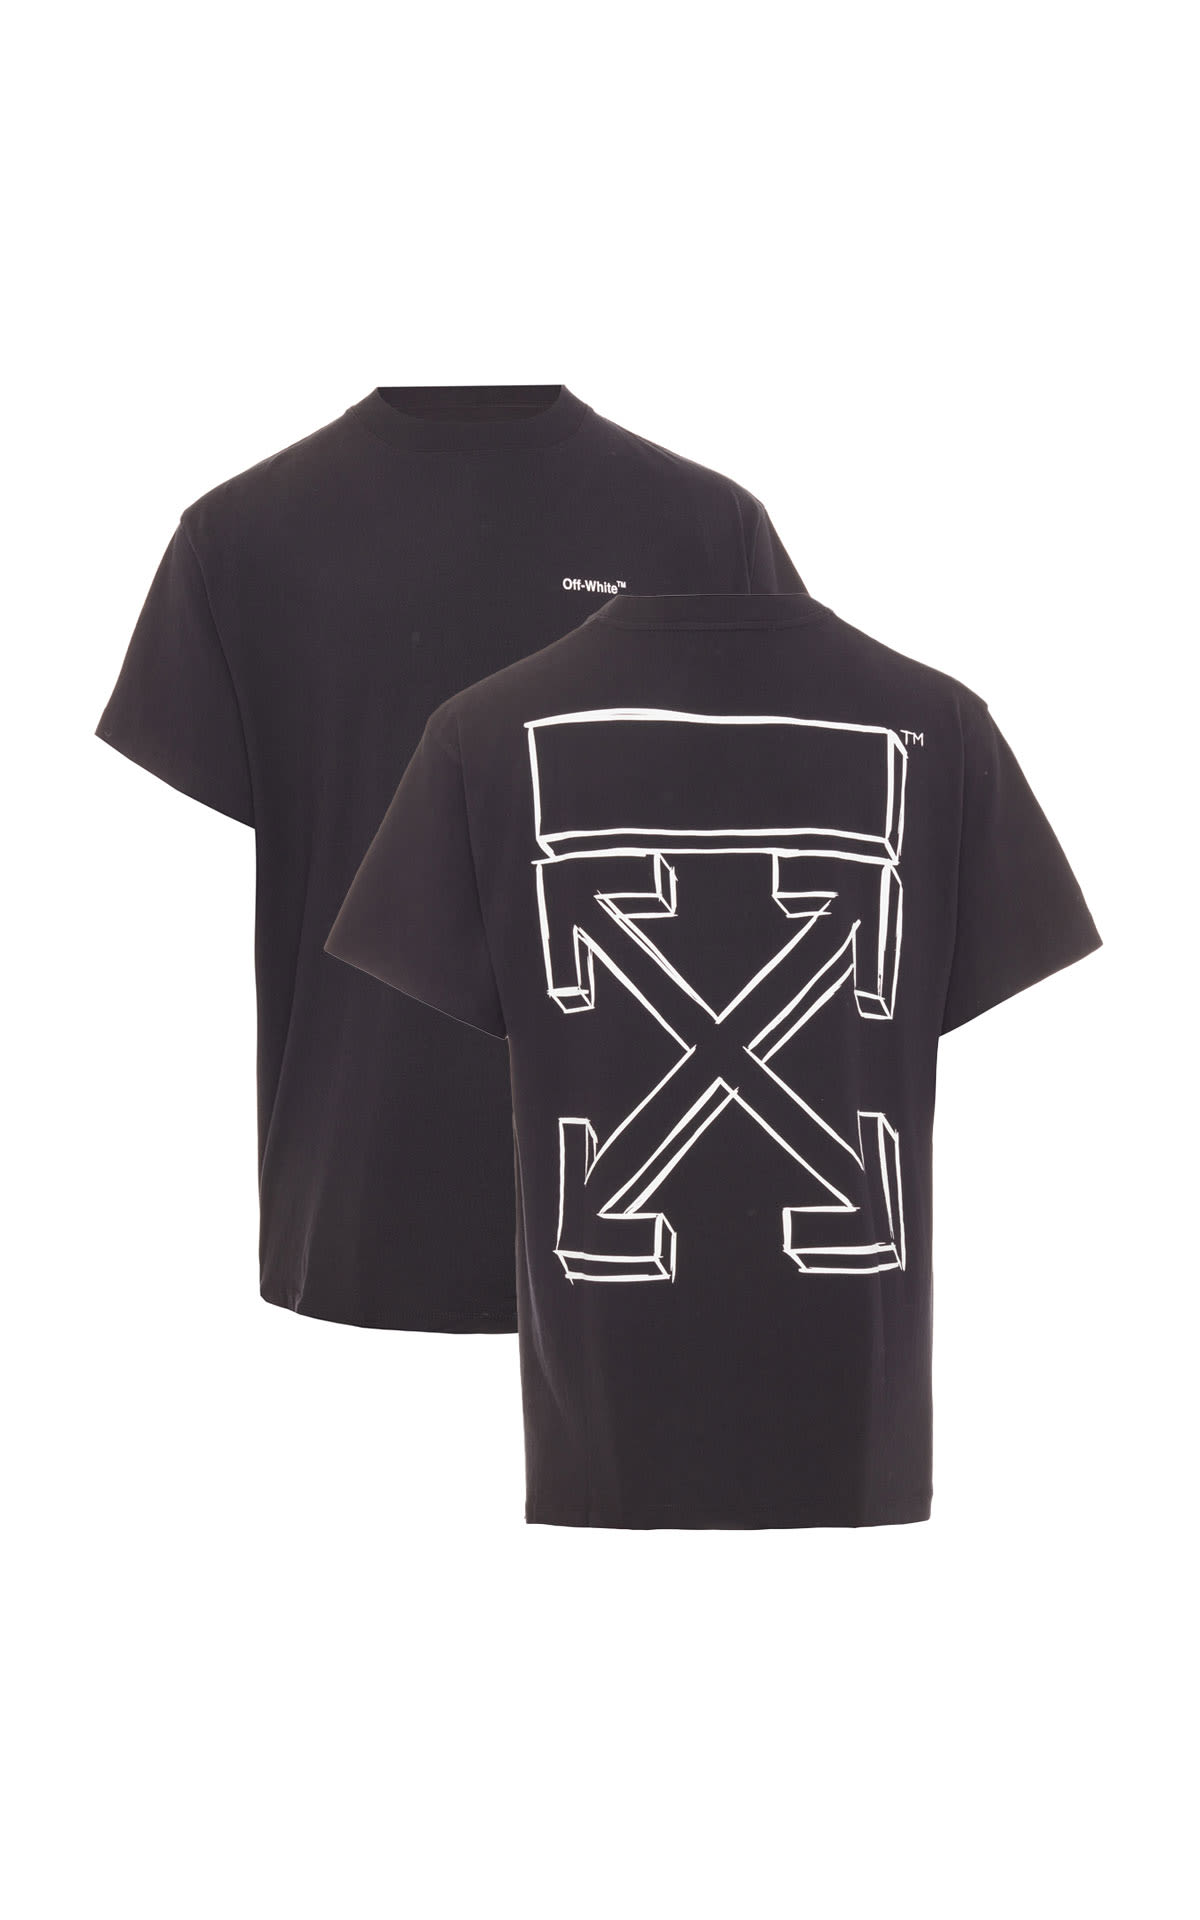 OFF-WHITE  Caravag arrow slim s/s tee black white from Bicester Village